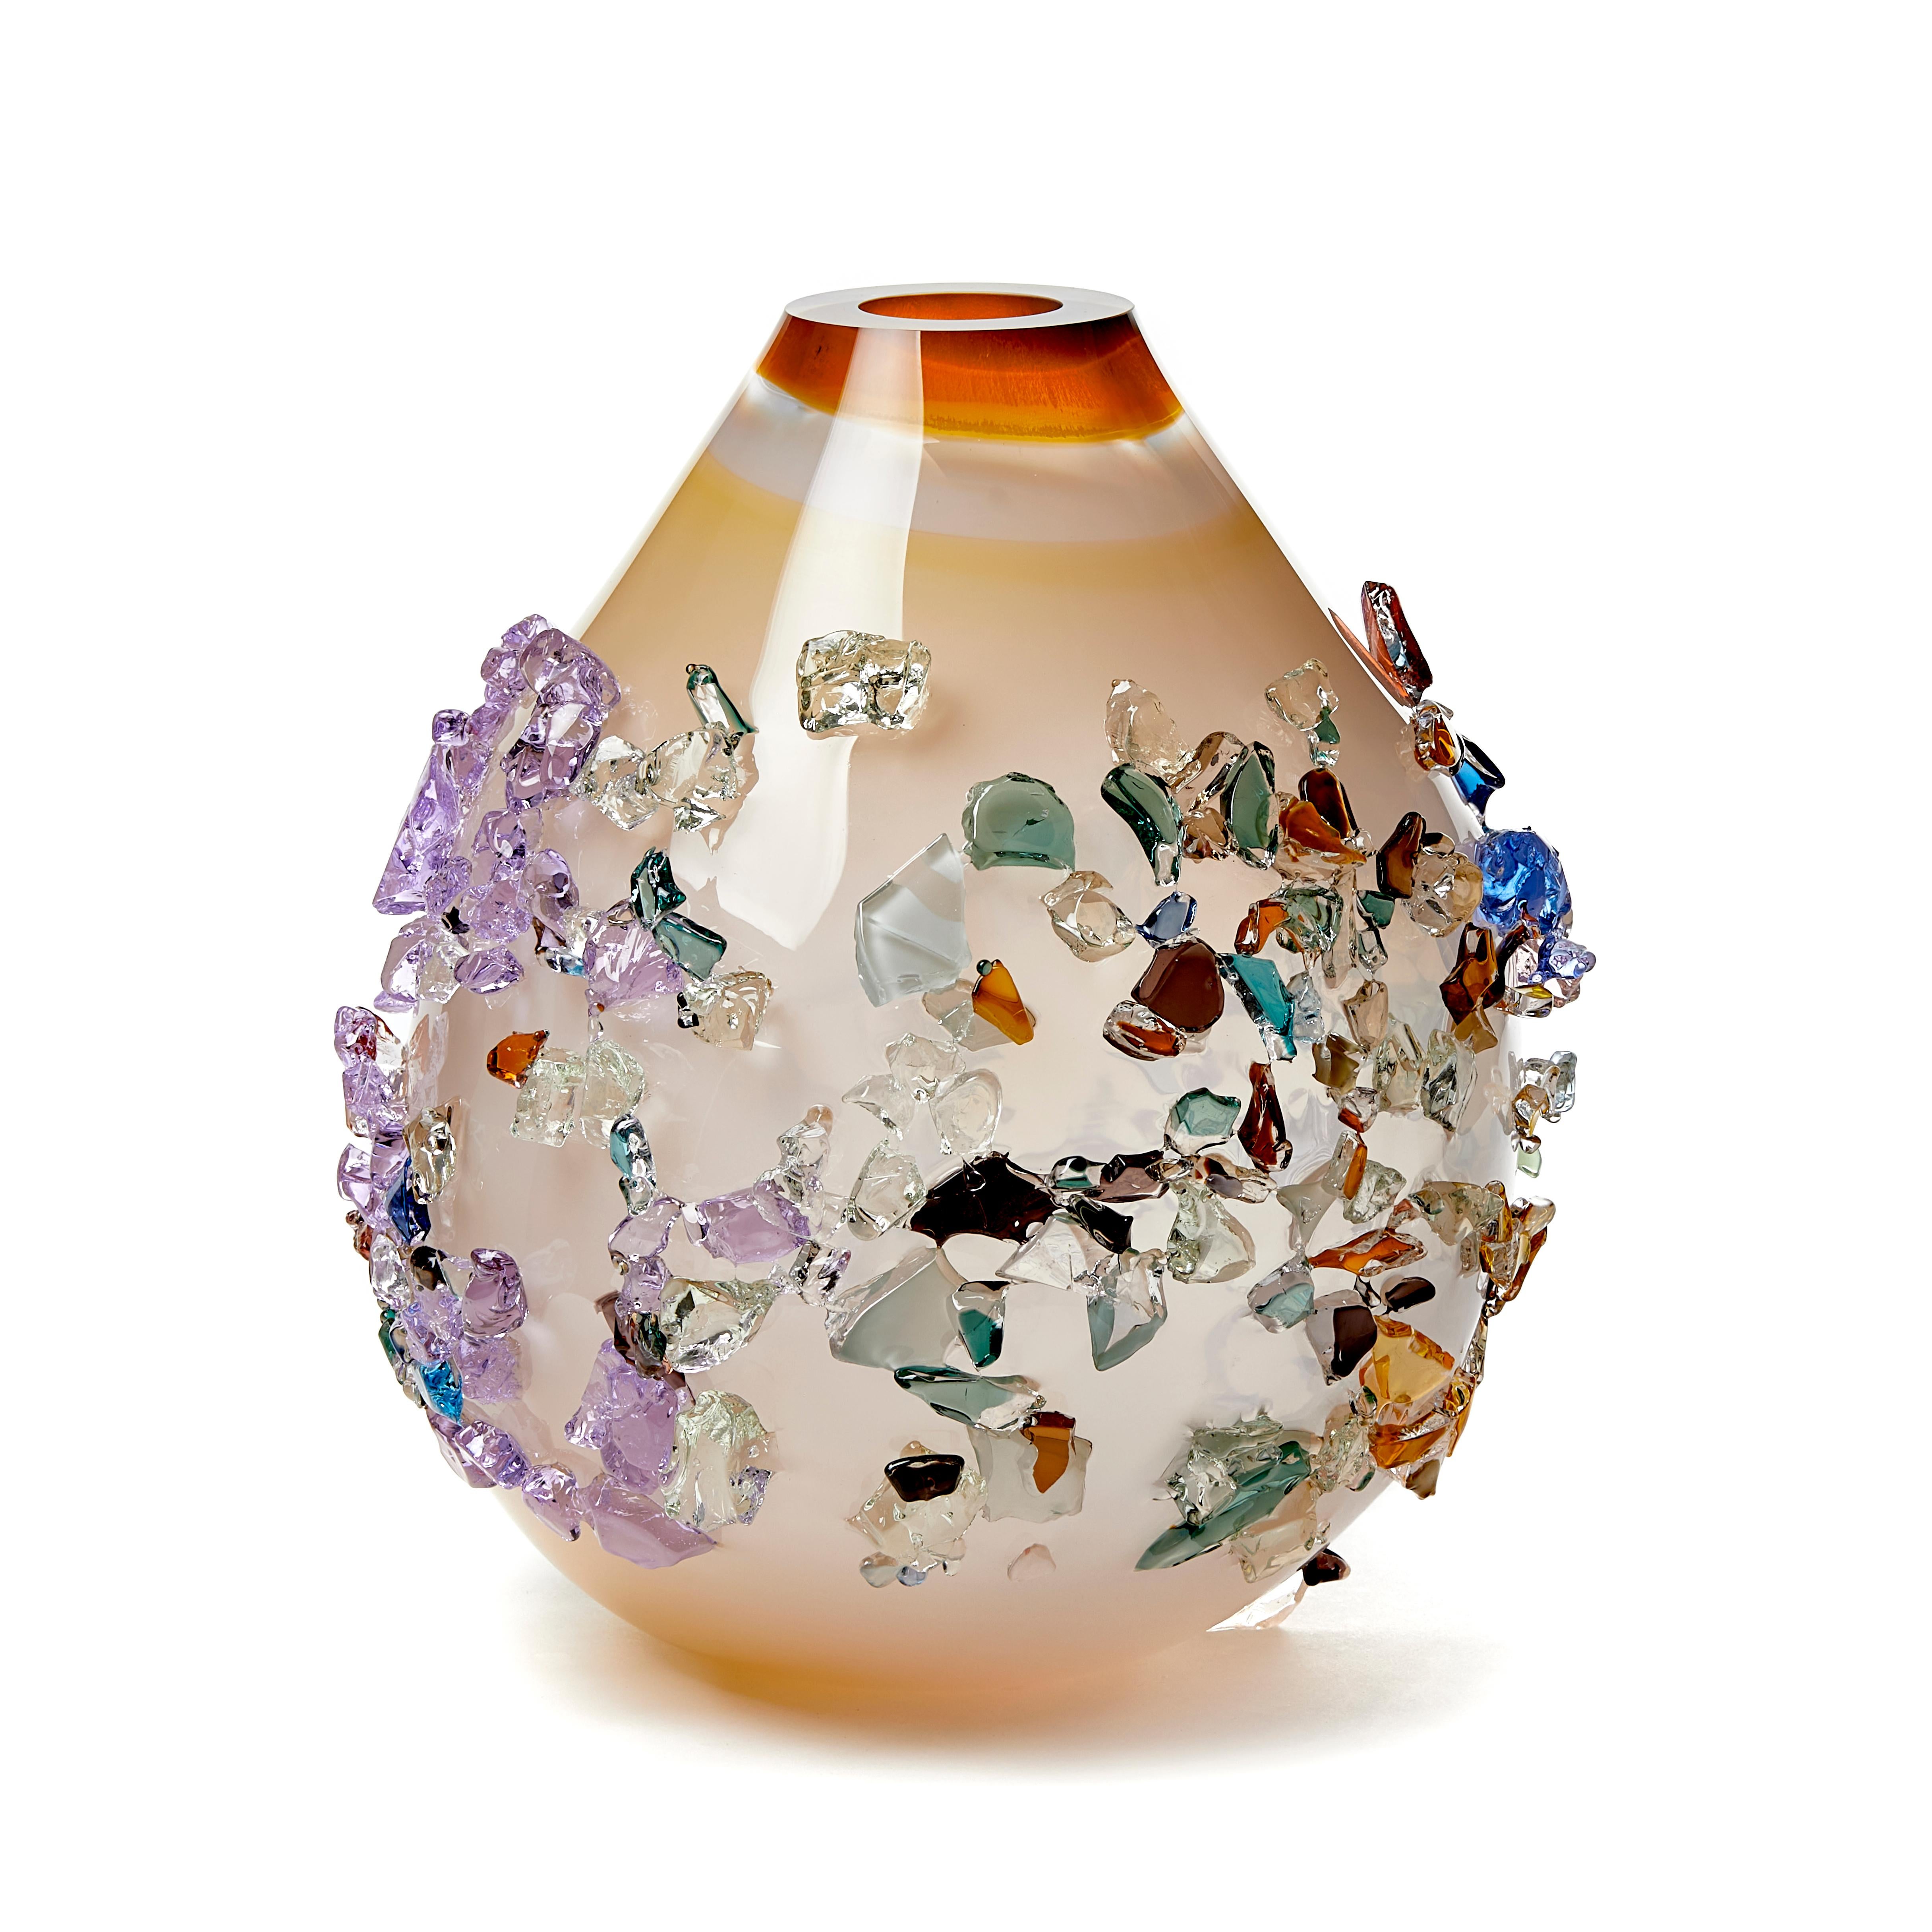 Sakura TRP20010 is a unique warm white, amber, turquoise and multicolored hand blown art glass sculptural vase, covered in an organic glass shard adornment by the Dutch artist Maarten Vorlijk. The piece is flame polished to soften the edges of all